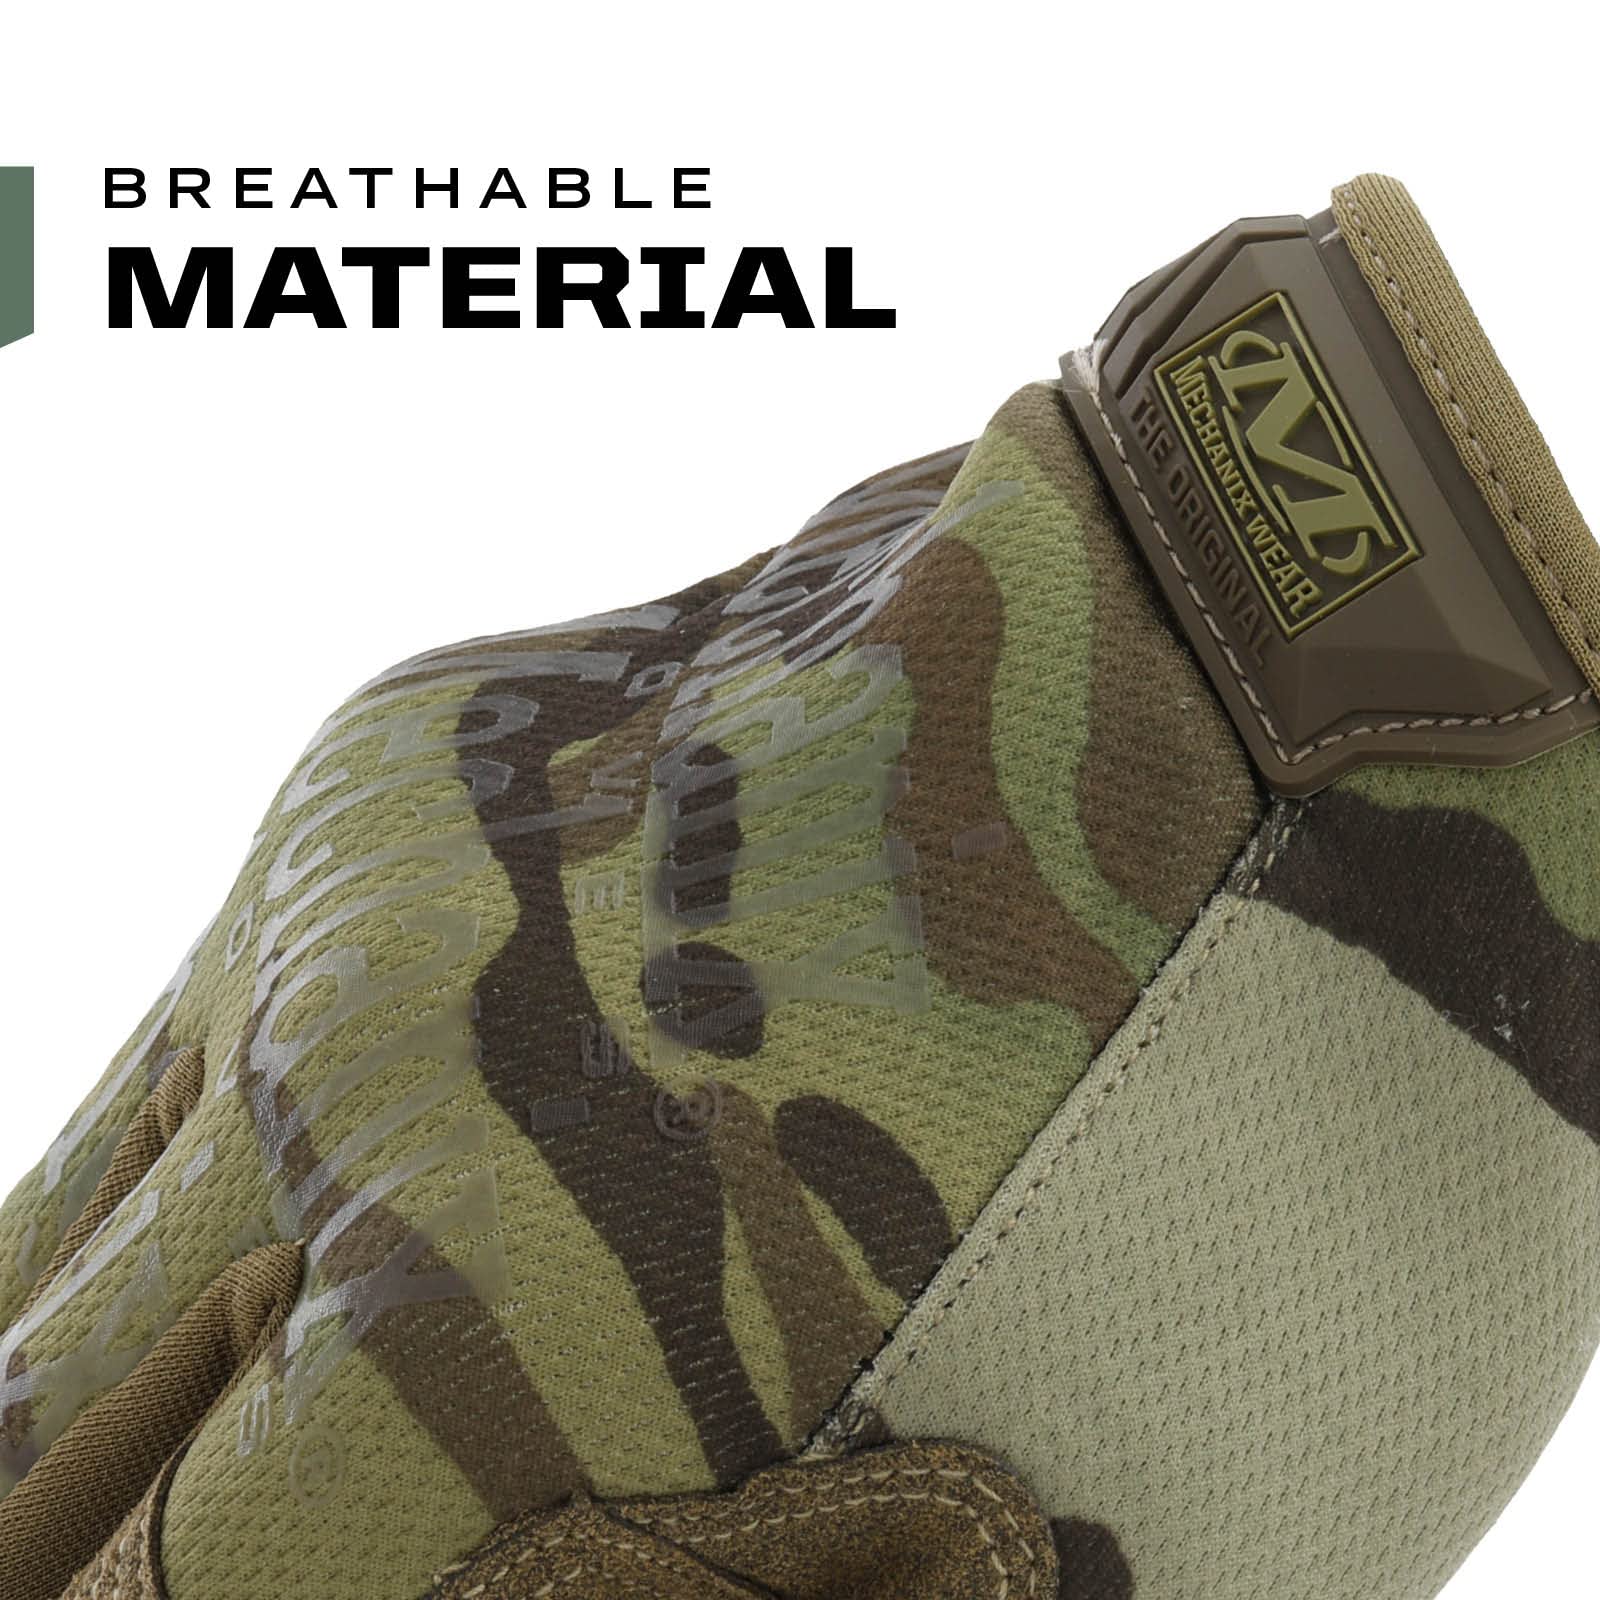 Mechanix Wear: The Original Tactical Work Gloves with Secure Fit, Flexible Grip for Multi-Purpose Use, Durable Touchscreen Safety Gloves for Men (Camouflage - MultiCam, Medium)